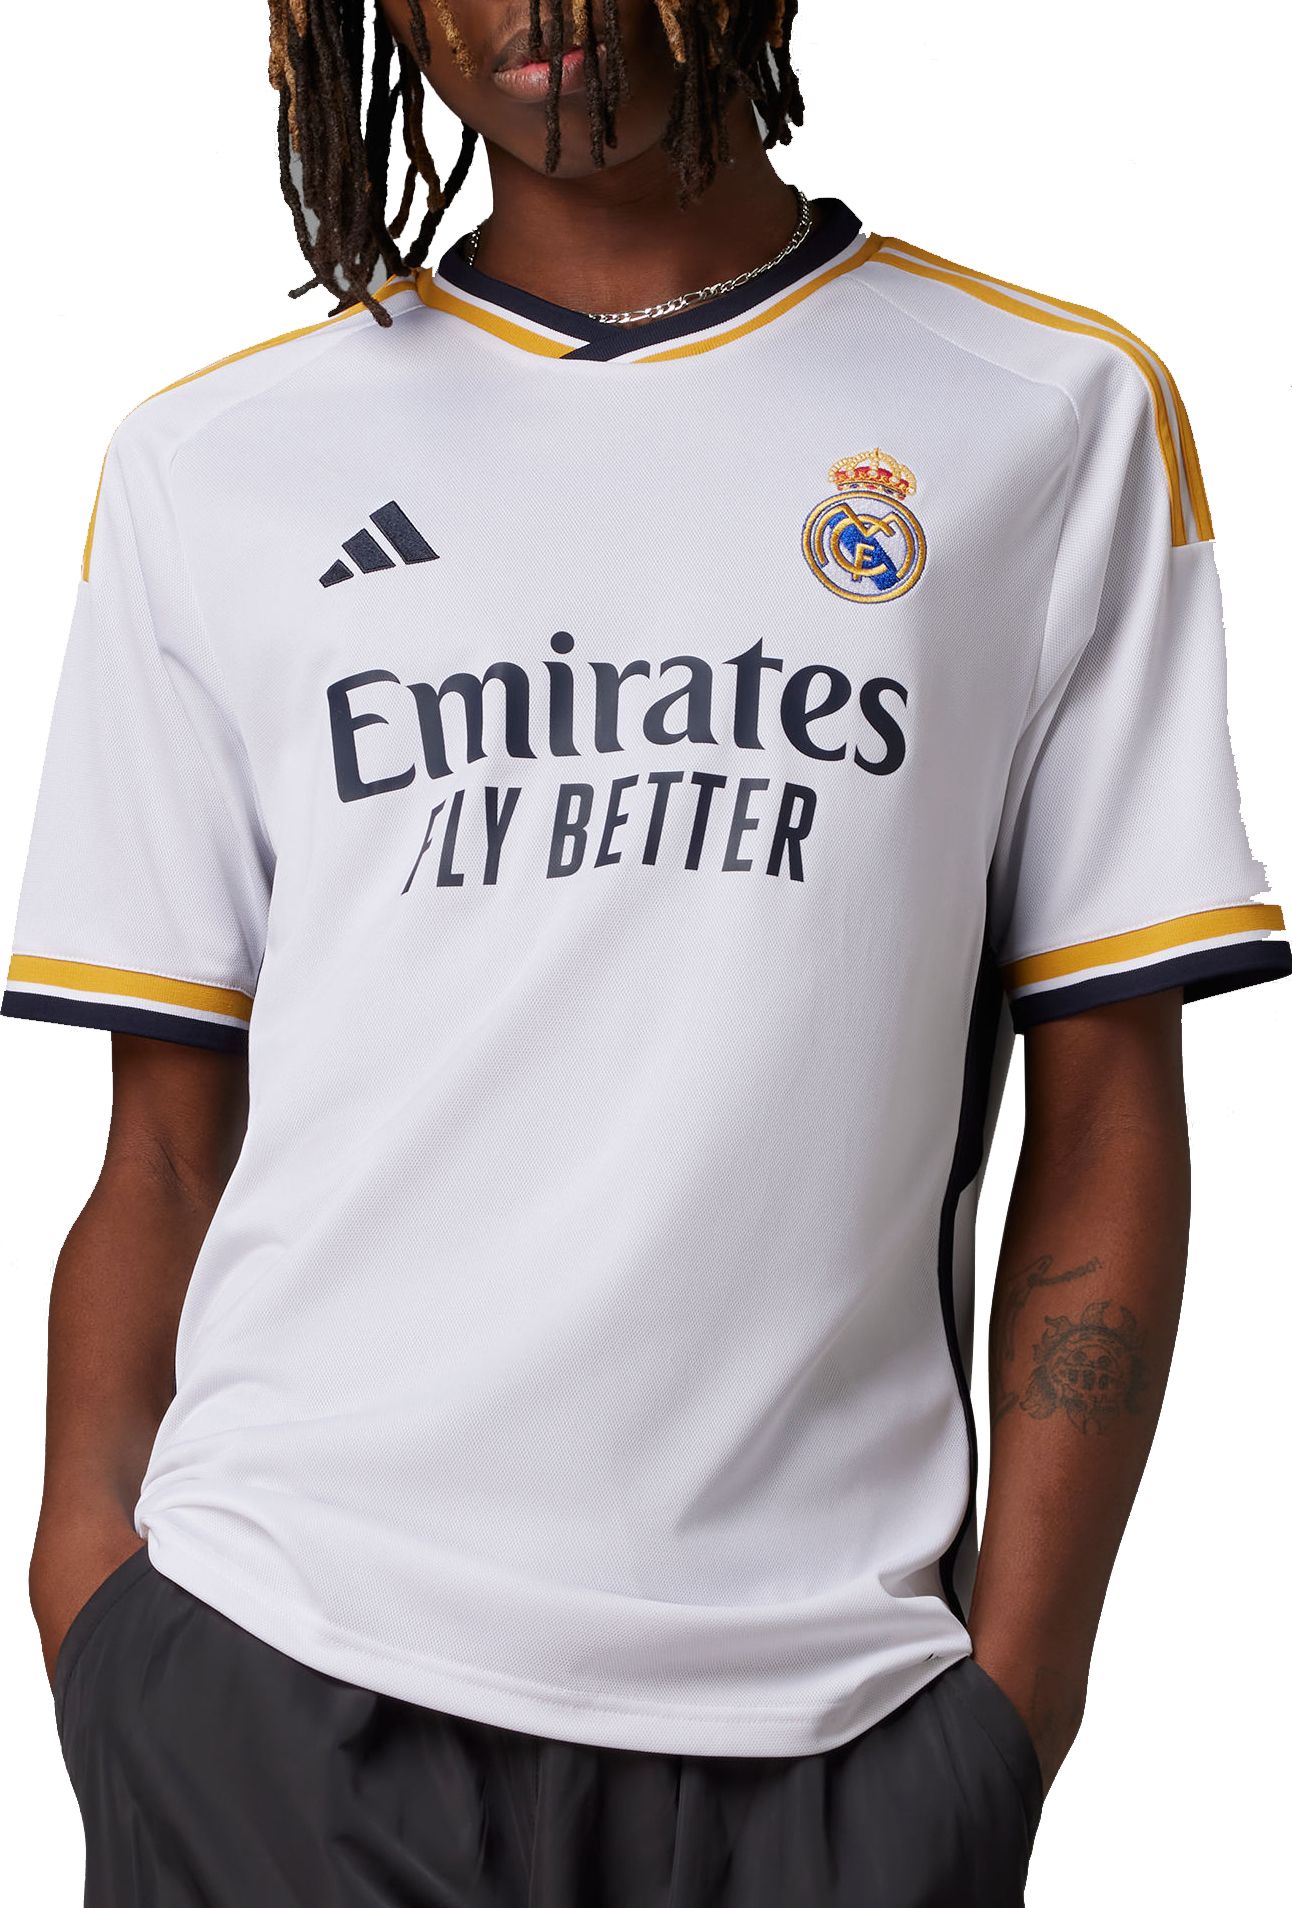 real madrid official shirt